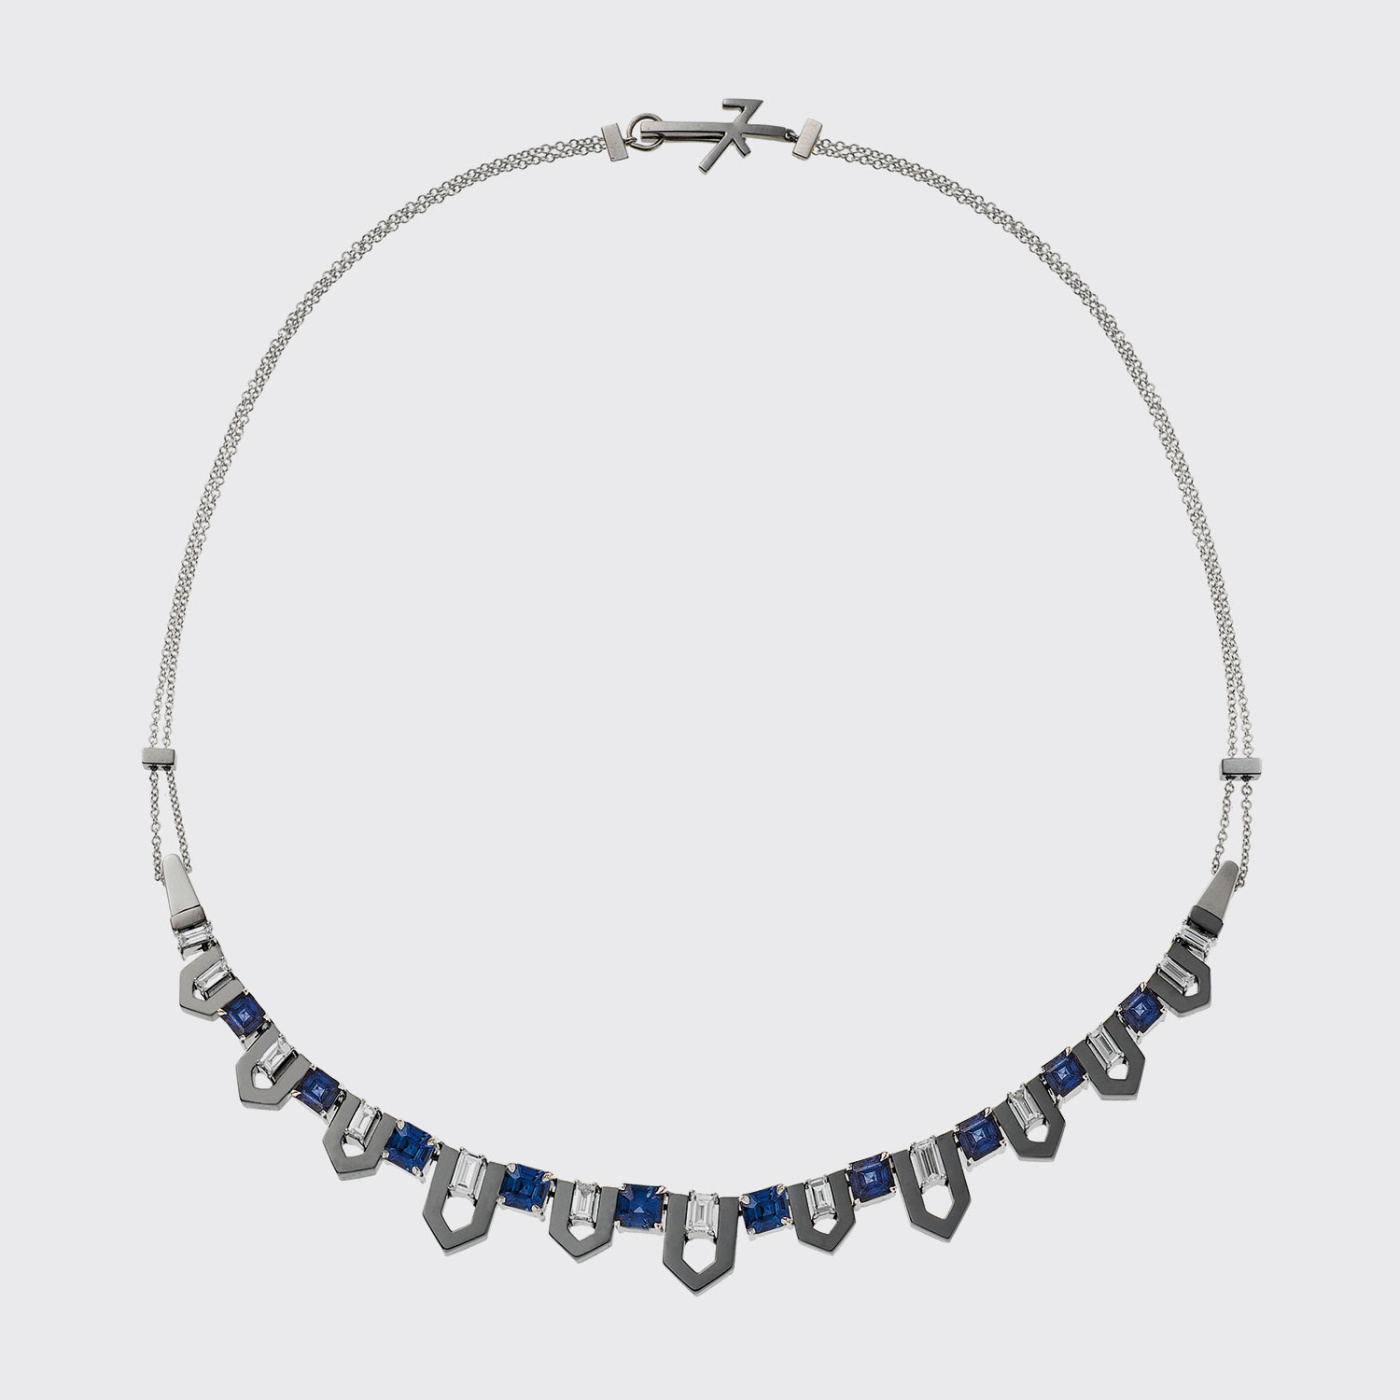 White and black gold necklace with blue sapphires and white diamonds